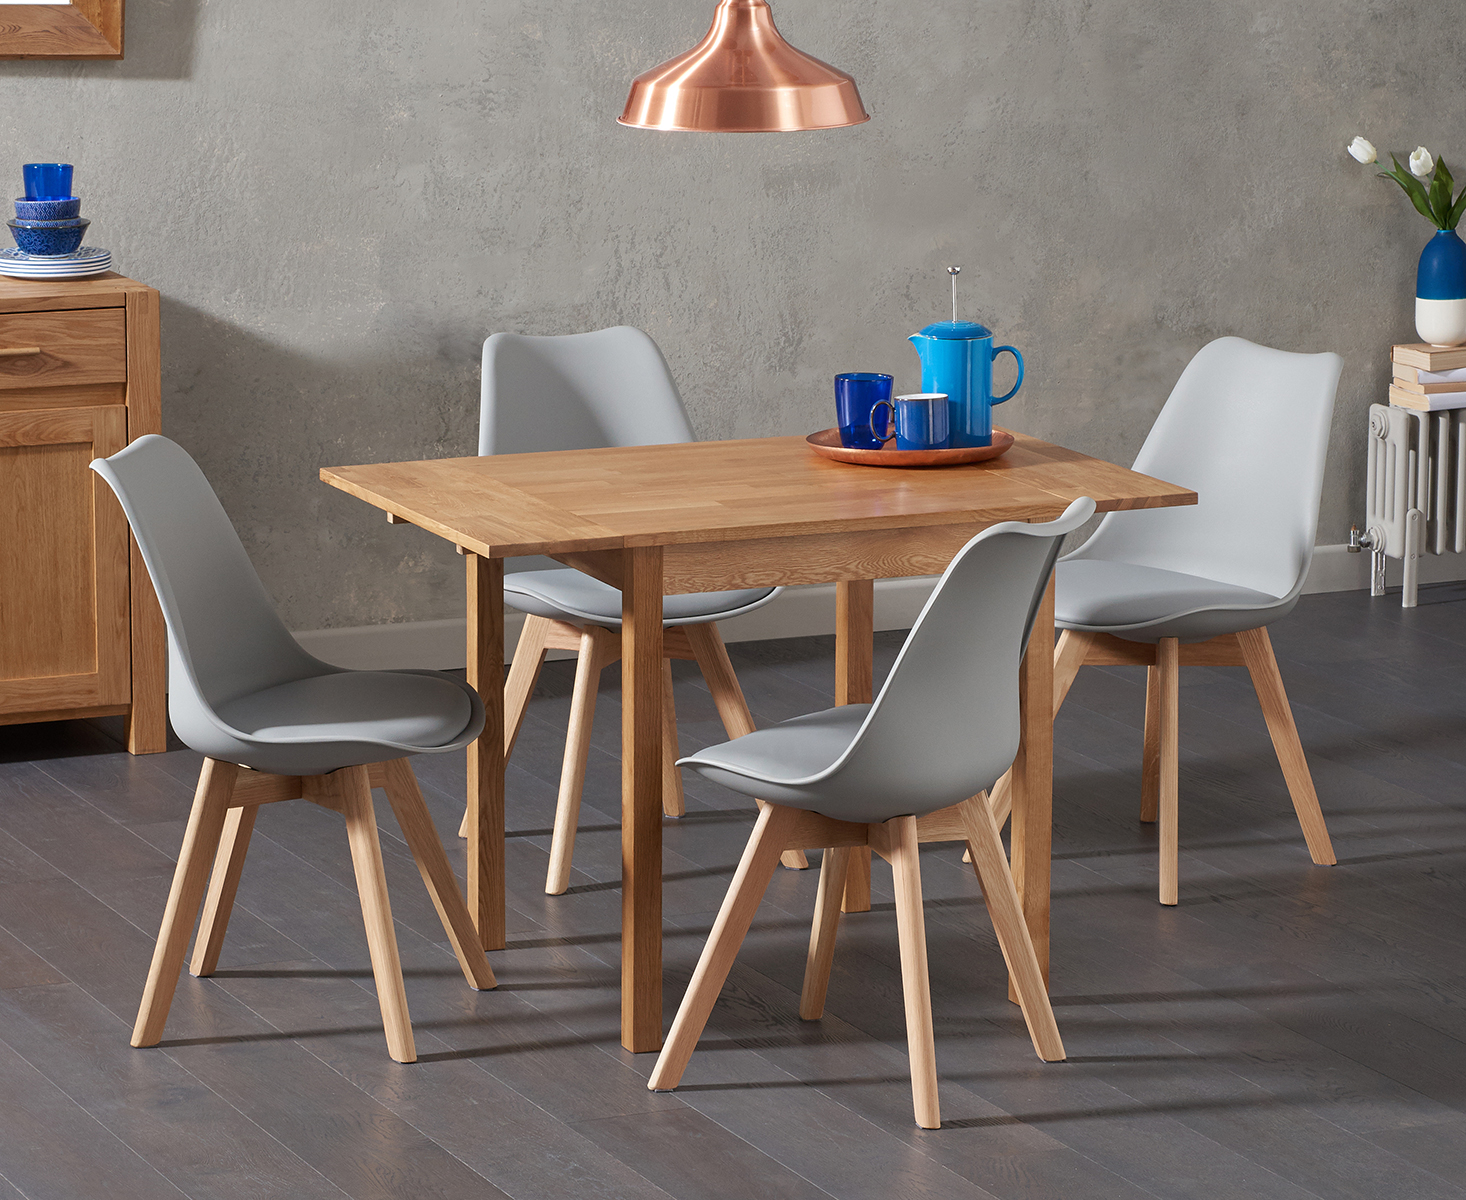 Oxford 70cm Solid Oak Extending Dining Table With 4 Dark Grey Orson Faux Leather Chairs